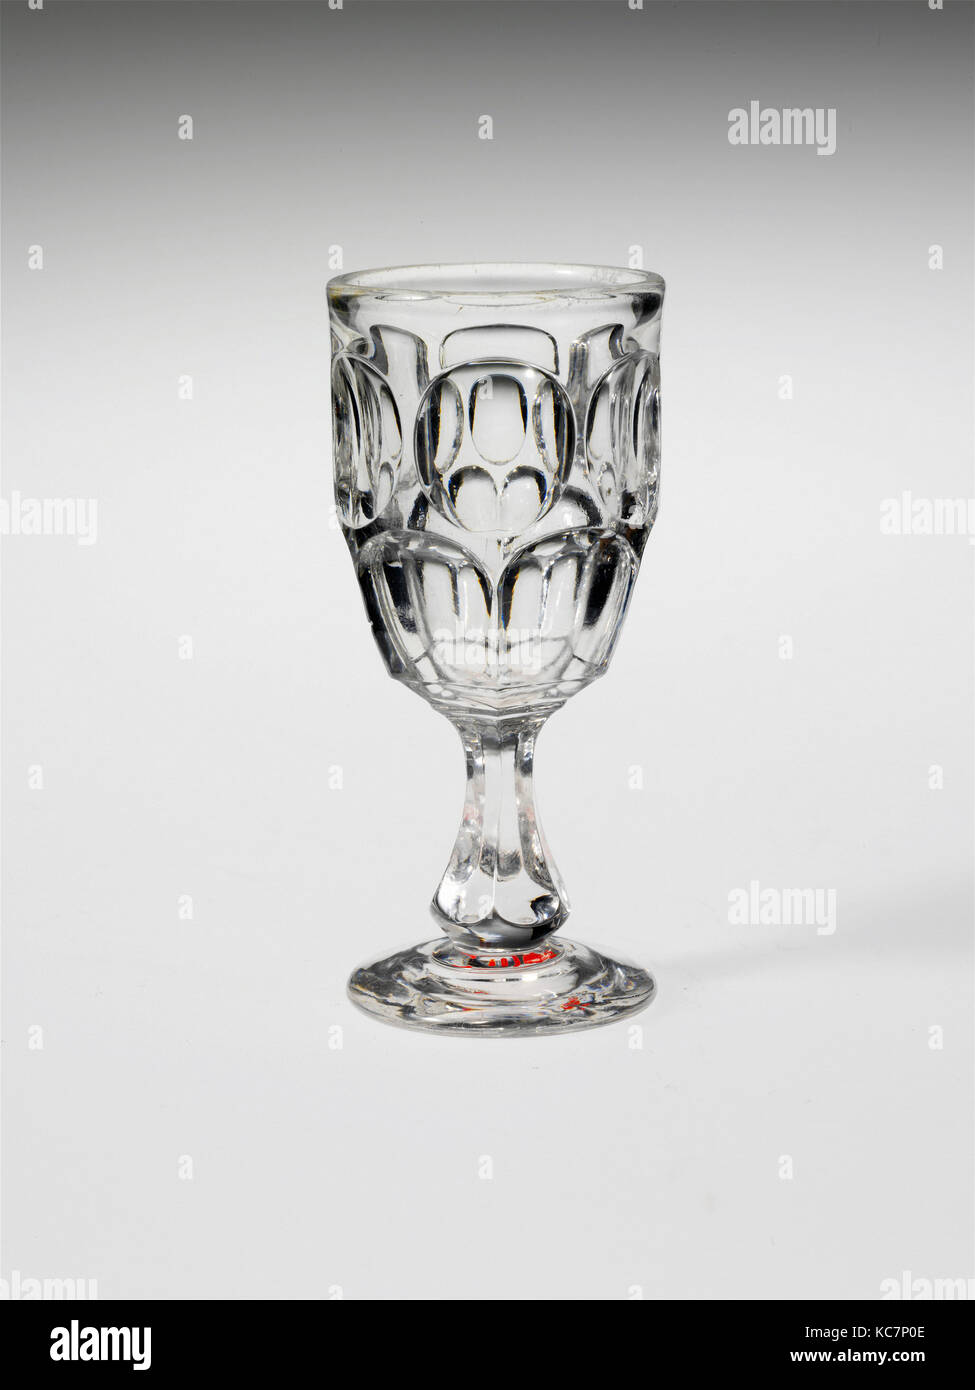 Cordial, 1830–70, Made in United States, American, Pressed glass, H. 3 5/16 in. (8.4 cm), Glass, With the development of new Stock Photo